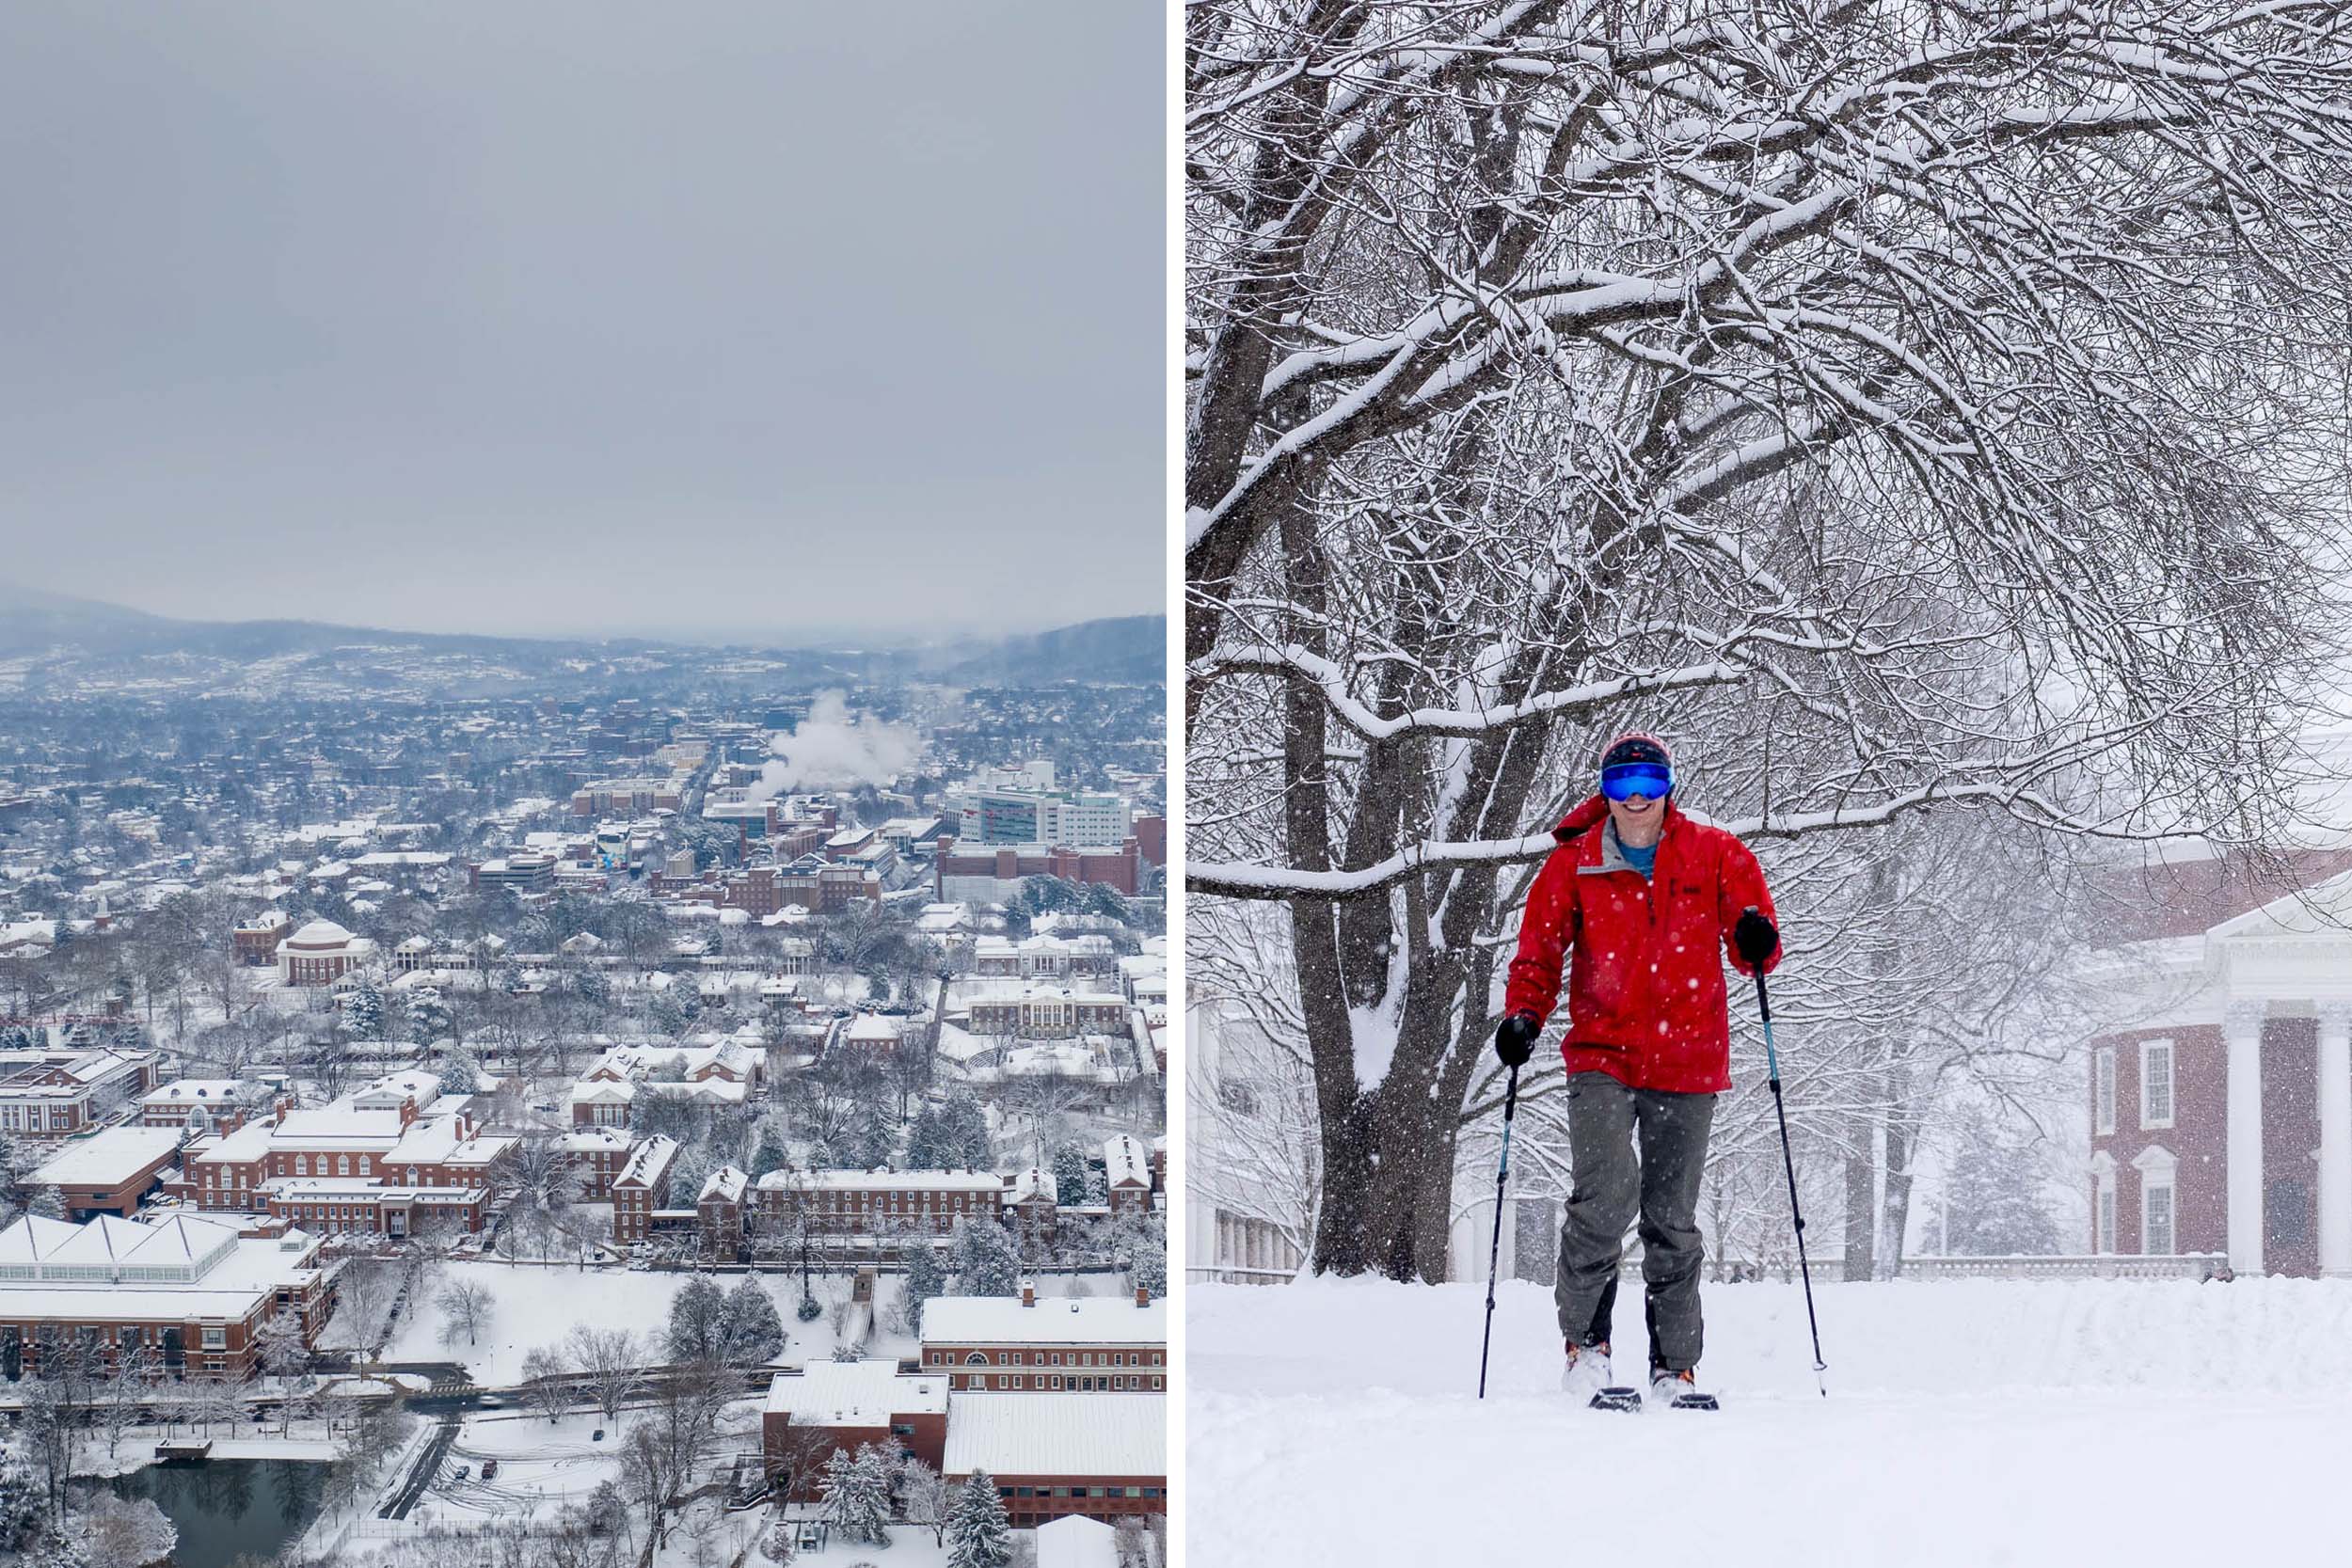 left: arial view of UVA, right: man skiing on grounds